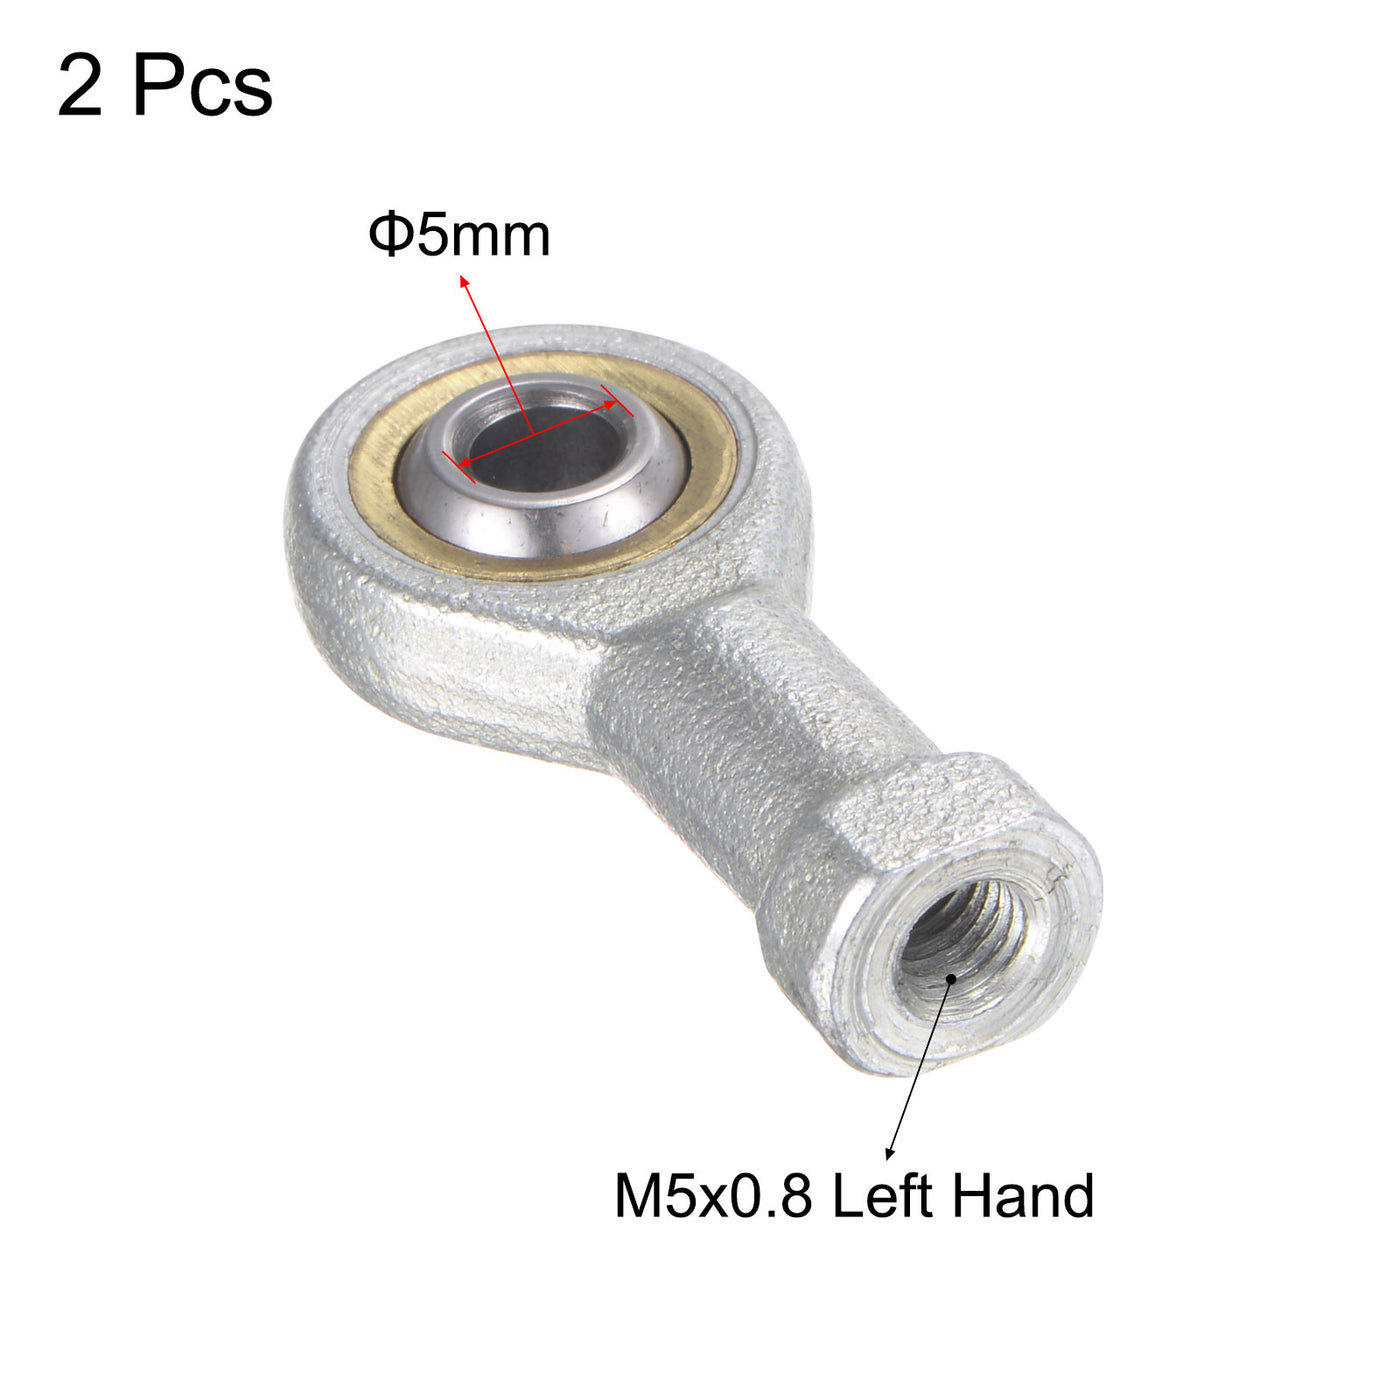 uxcell Uxcell 2pcs SI5TK PHSA5 Rod End Bearing 5mm Bore M5x0.8 Left Hand Female Thread